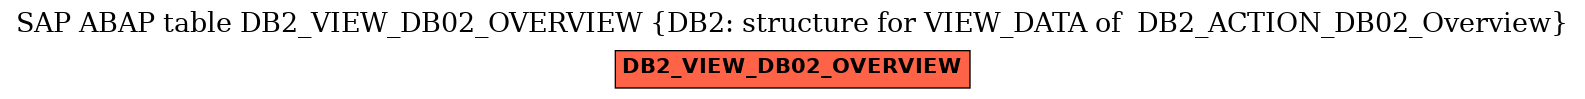 E-R Diagram for table DB2_VIEW_DB02_OVERVIEW (DB2: structure for VIEW_DATA of  DB2_ACTION_DB02_Overview)